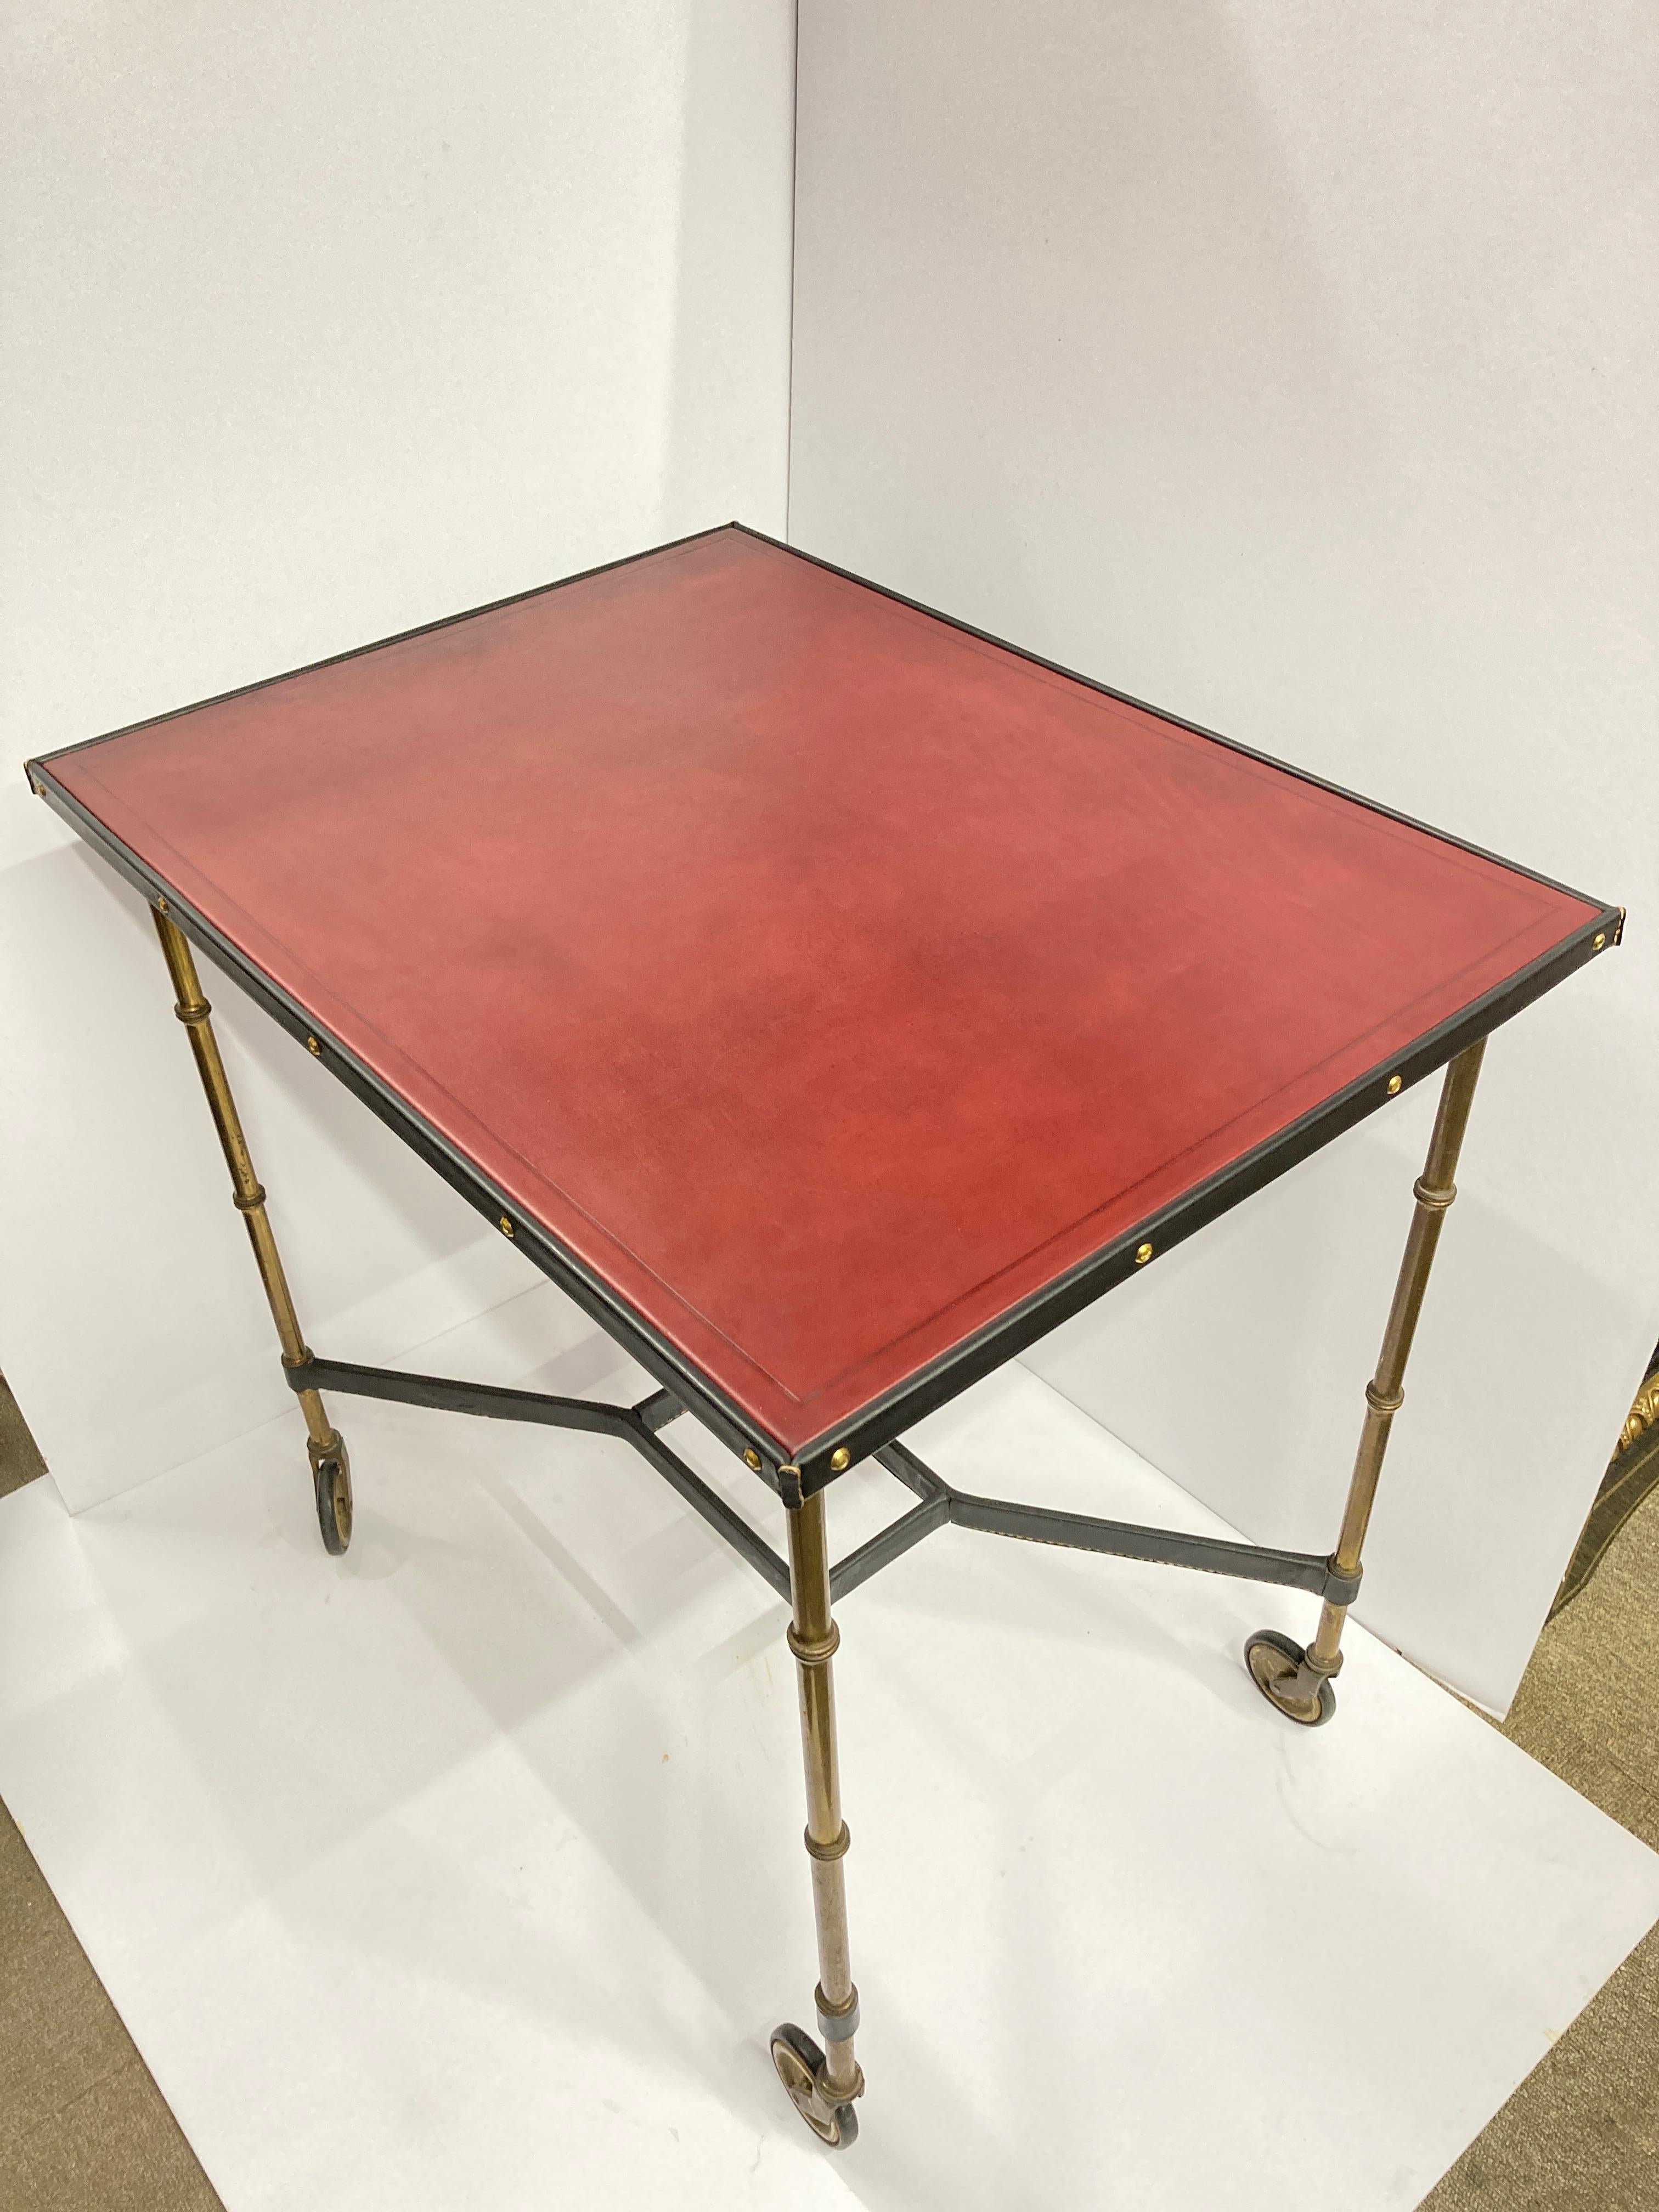 Great table on wheel 
Stitched leather, black and burgundy 
Brass feet like bamboo
Possibility to add a glass on the low part 